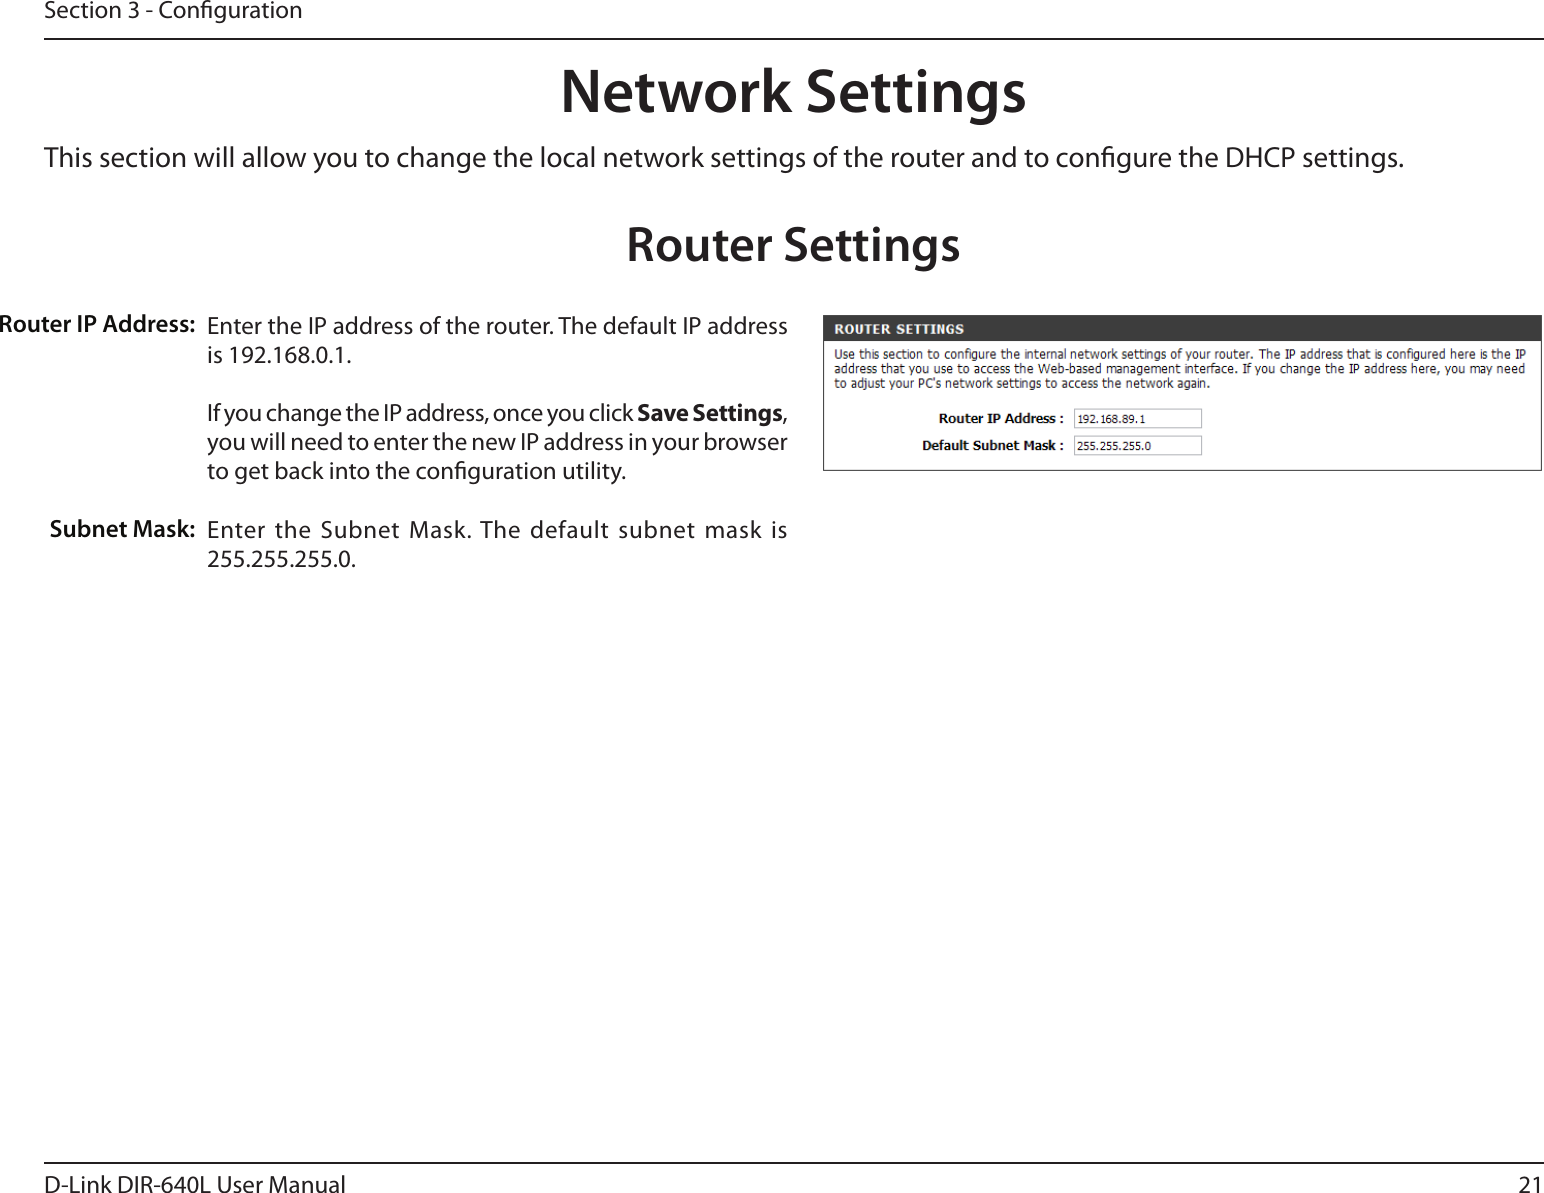 21D-Link DIR-640L User ManualSection 3 - CongurationThis section will allow you to change the local network settings of the router and to congure the DHCP settings.Network SettingsEnter the IP address of the router. The default IP address is 192.168.0.1.If you change the IP address, once you click Save Settings, you will need to enter the new IP address in your browser to get back into the conguration utility.Enter the Subnet  Mask. The default  subnet mask  is 255.255.255.0.Router IP Address:Subnet Mask:Router Settings